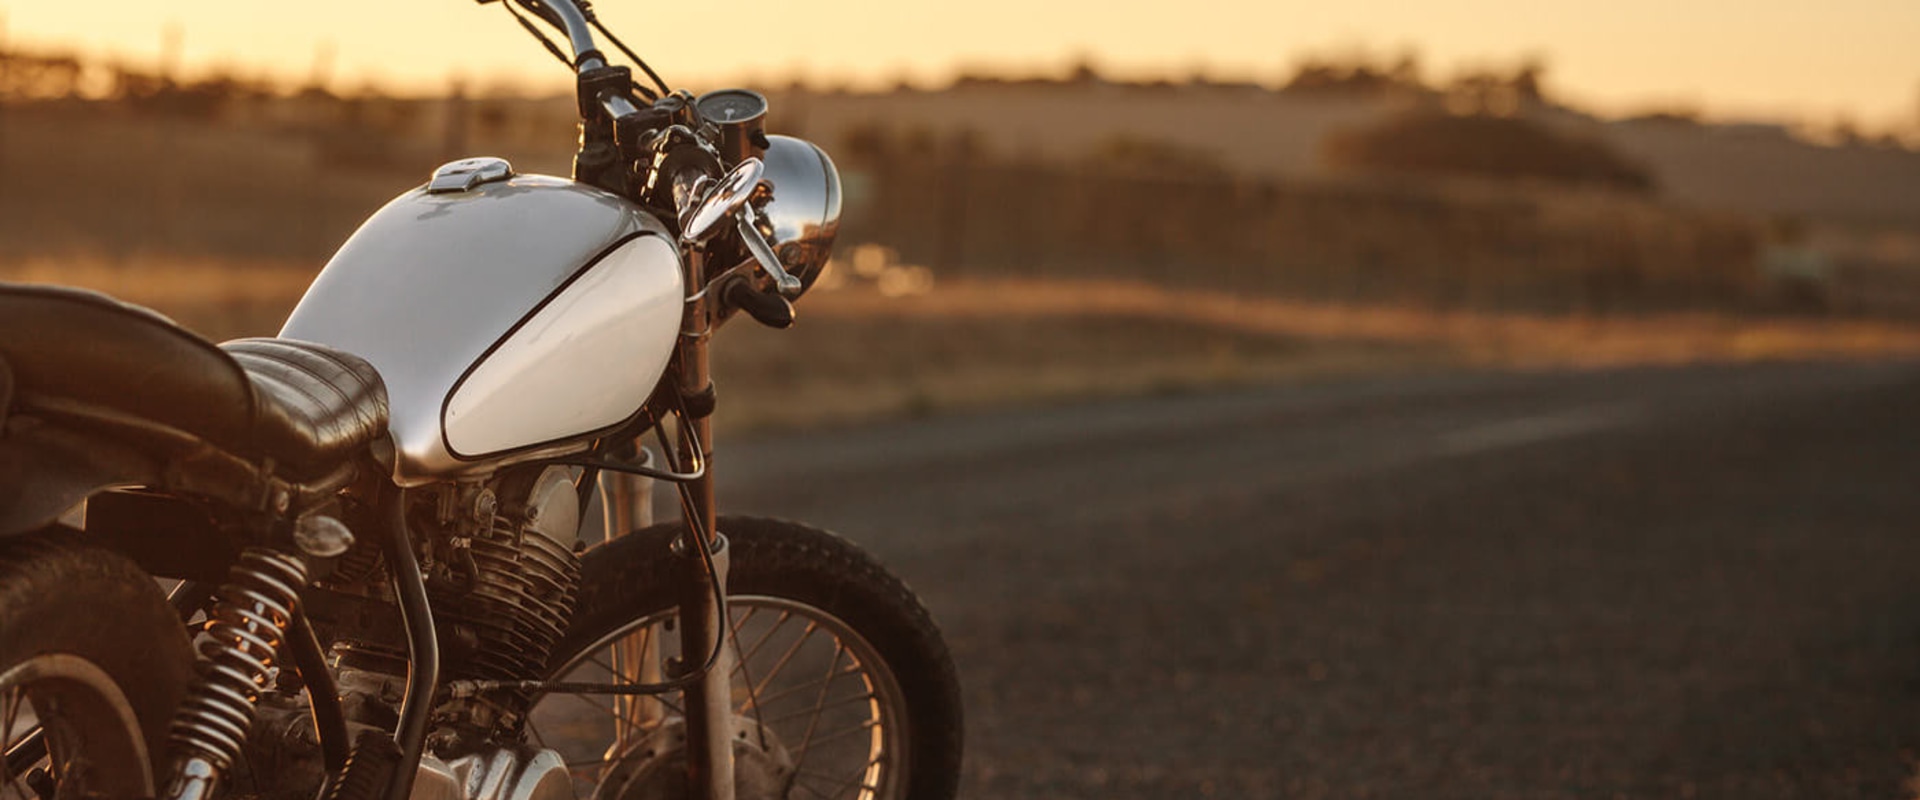 How Much Does Motorcycle Insurance Cost? A Comprehensive Guide to Finding the Best Rates